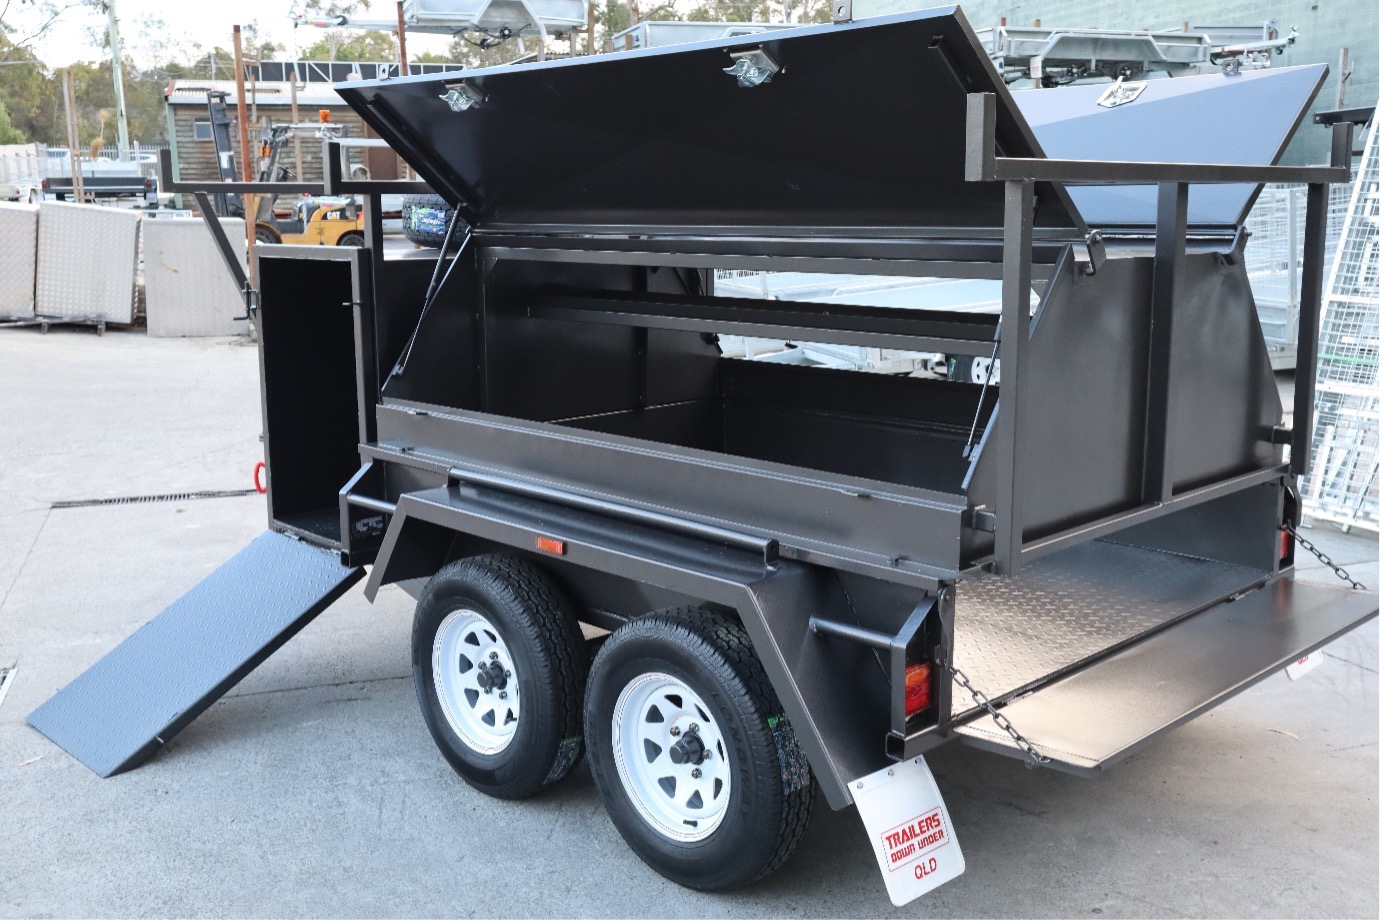 Tradie Top Trailer for Sale in Brisbane with Compressor Box